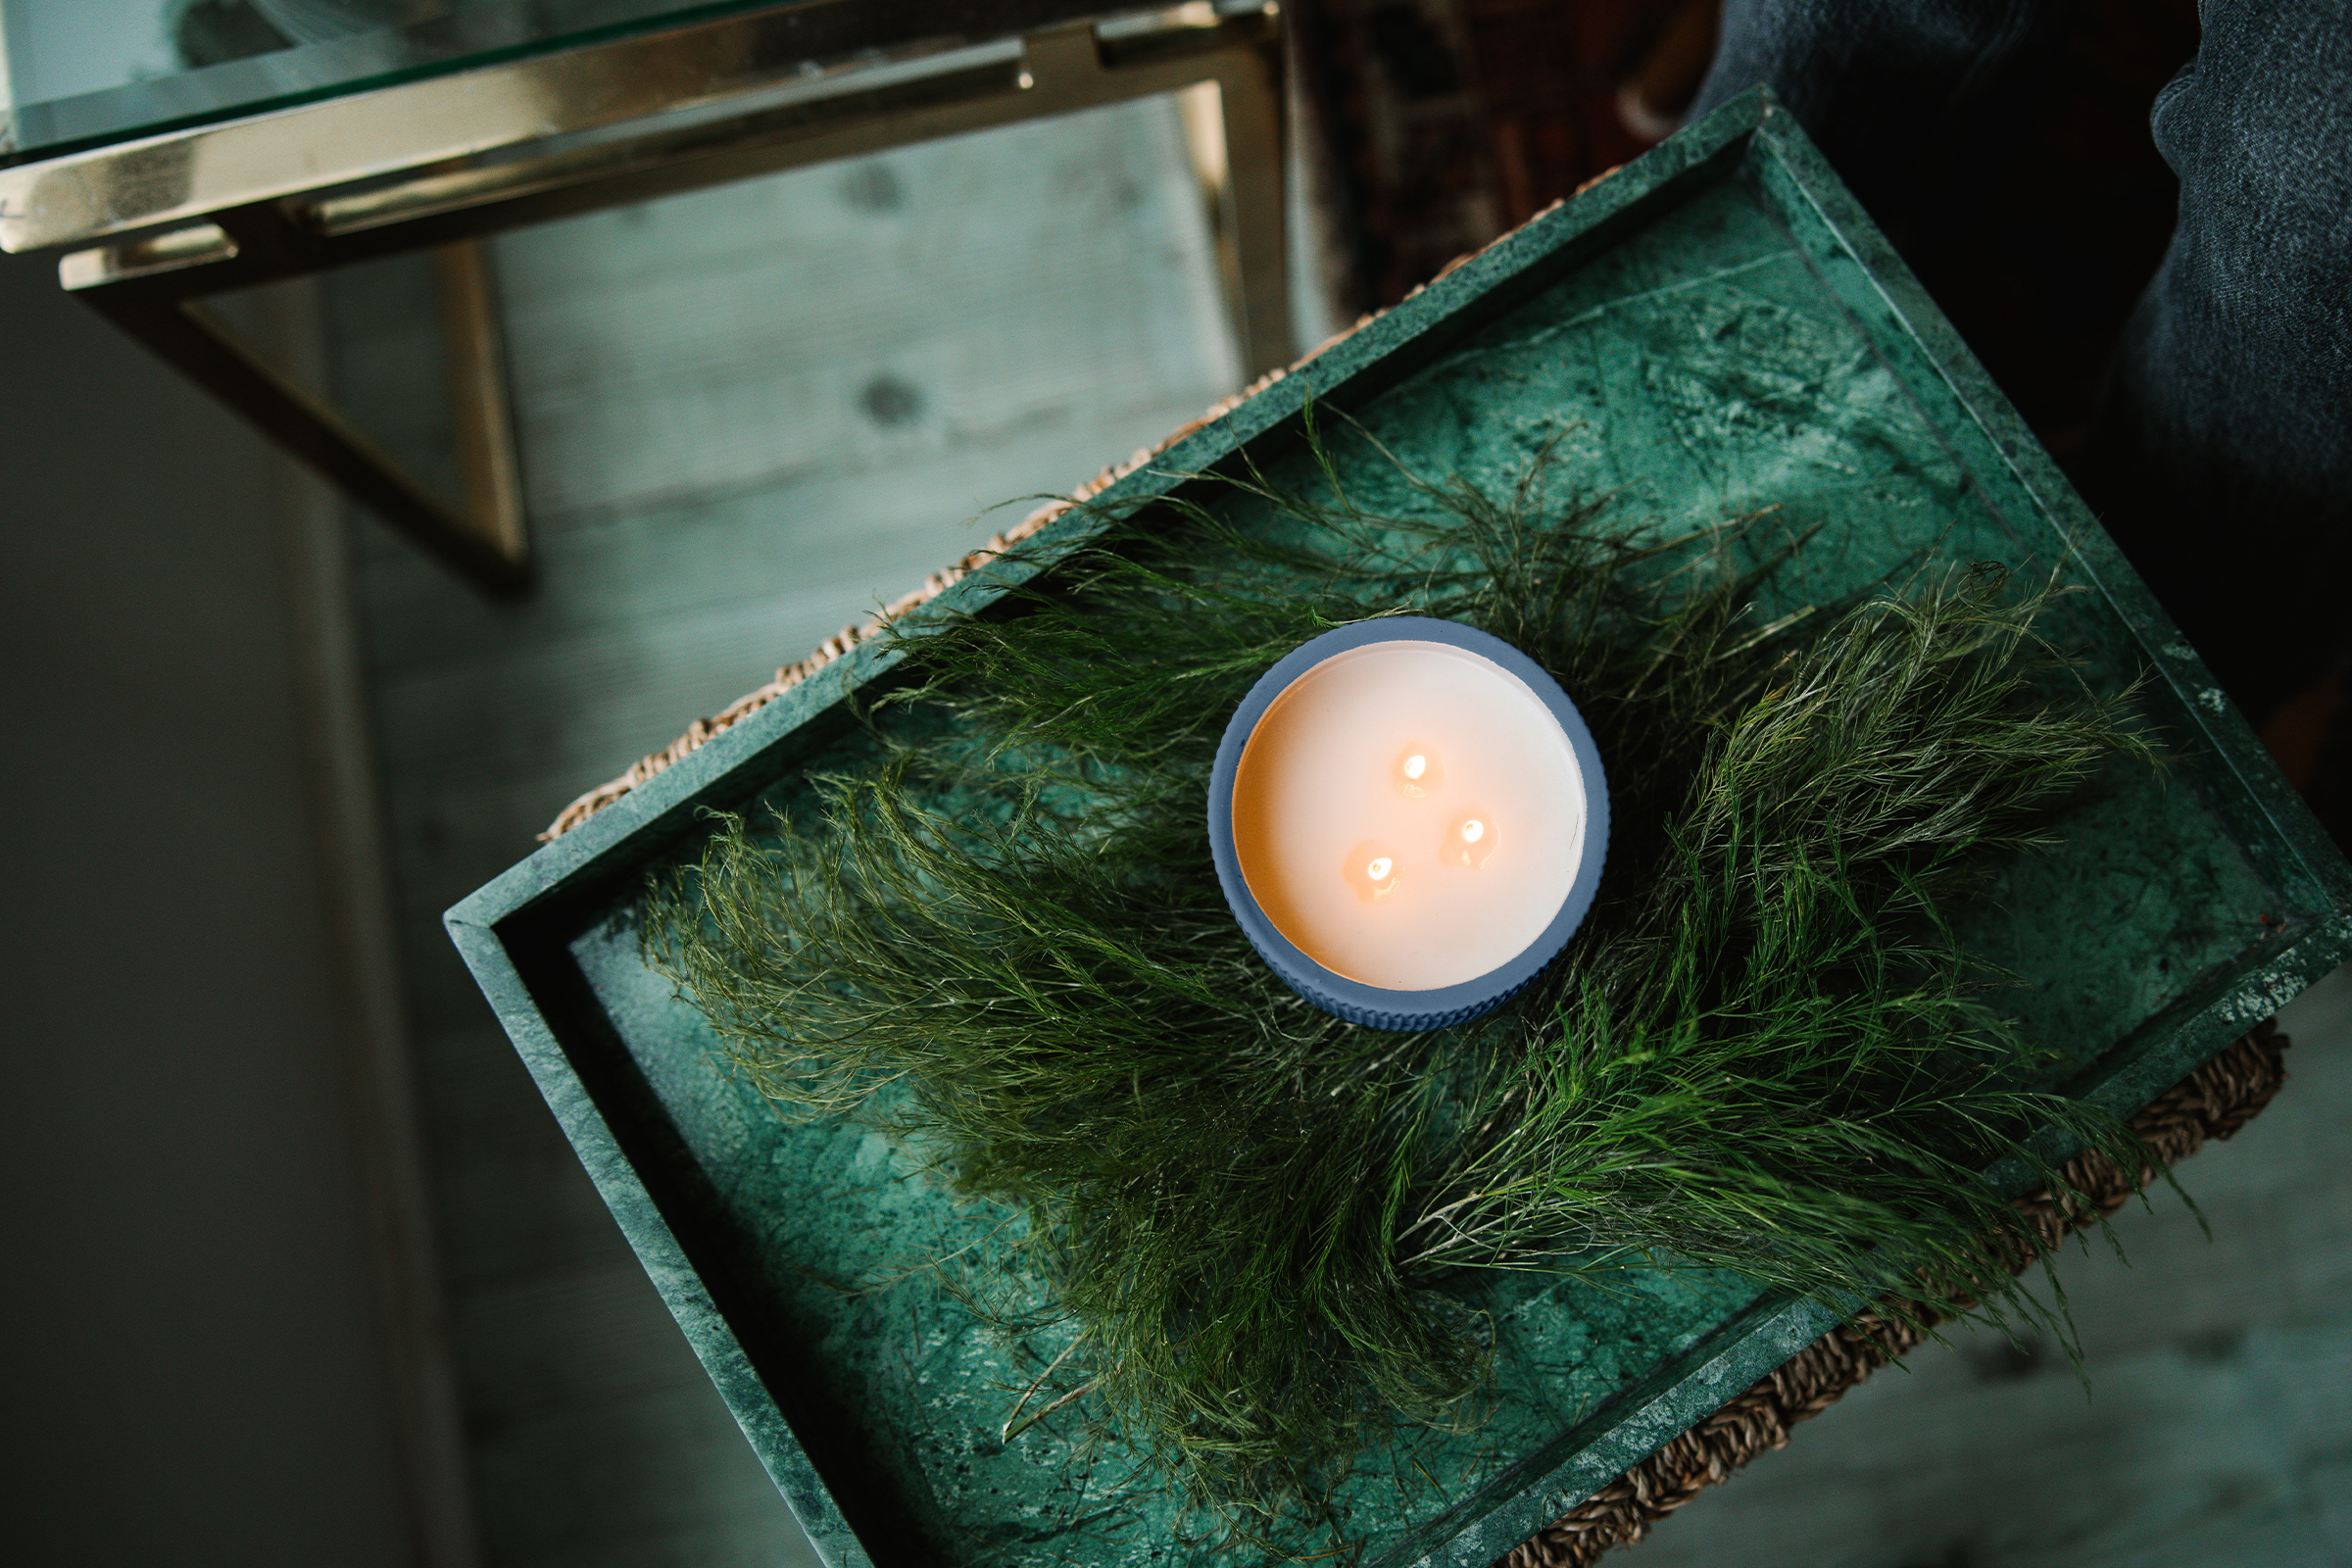 A River Moss & Teakwood Candle on a bed of fern